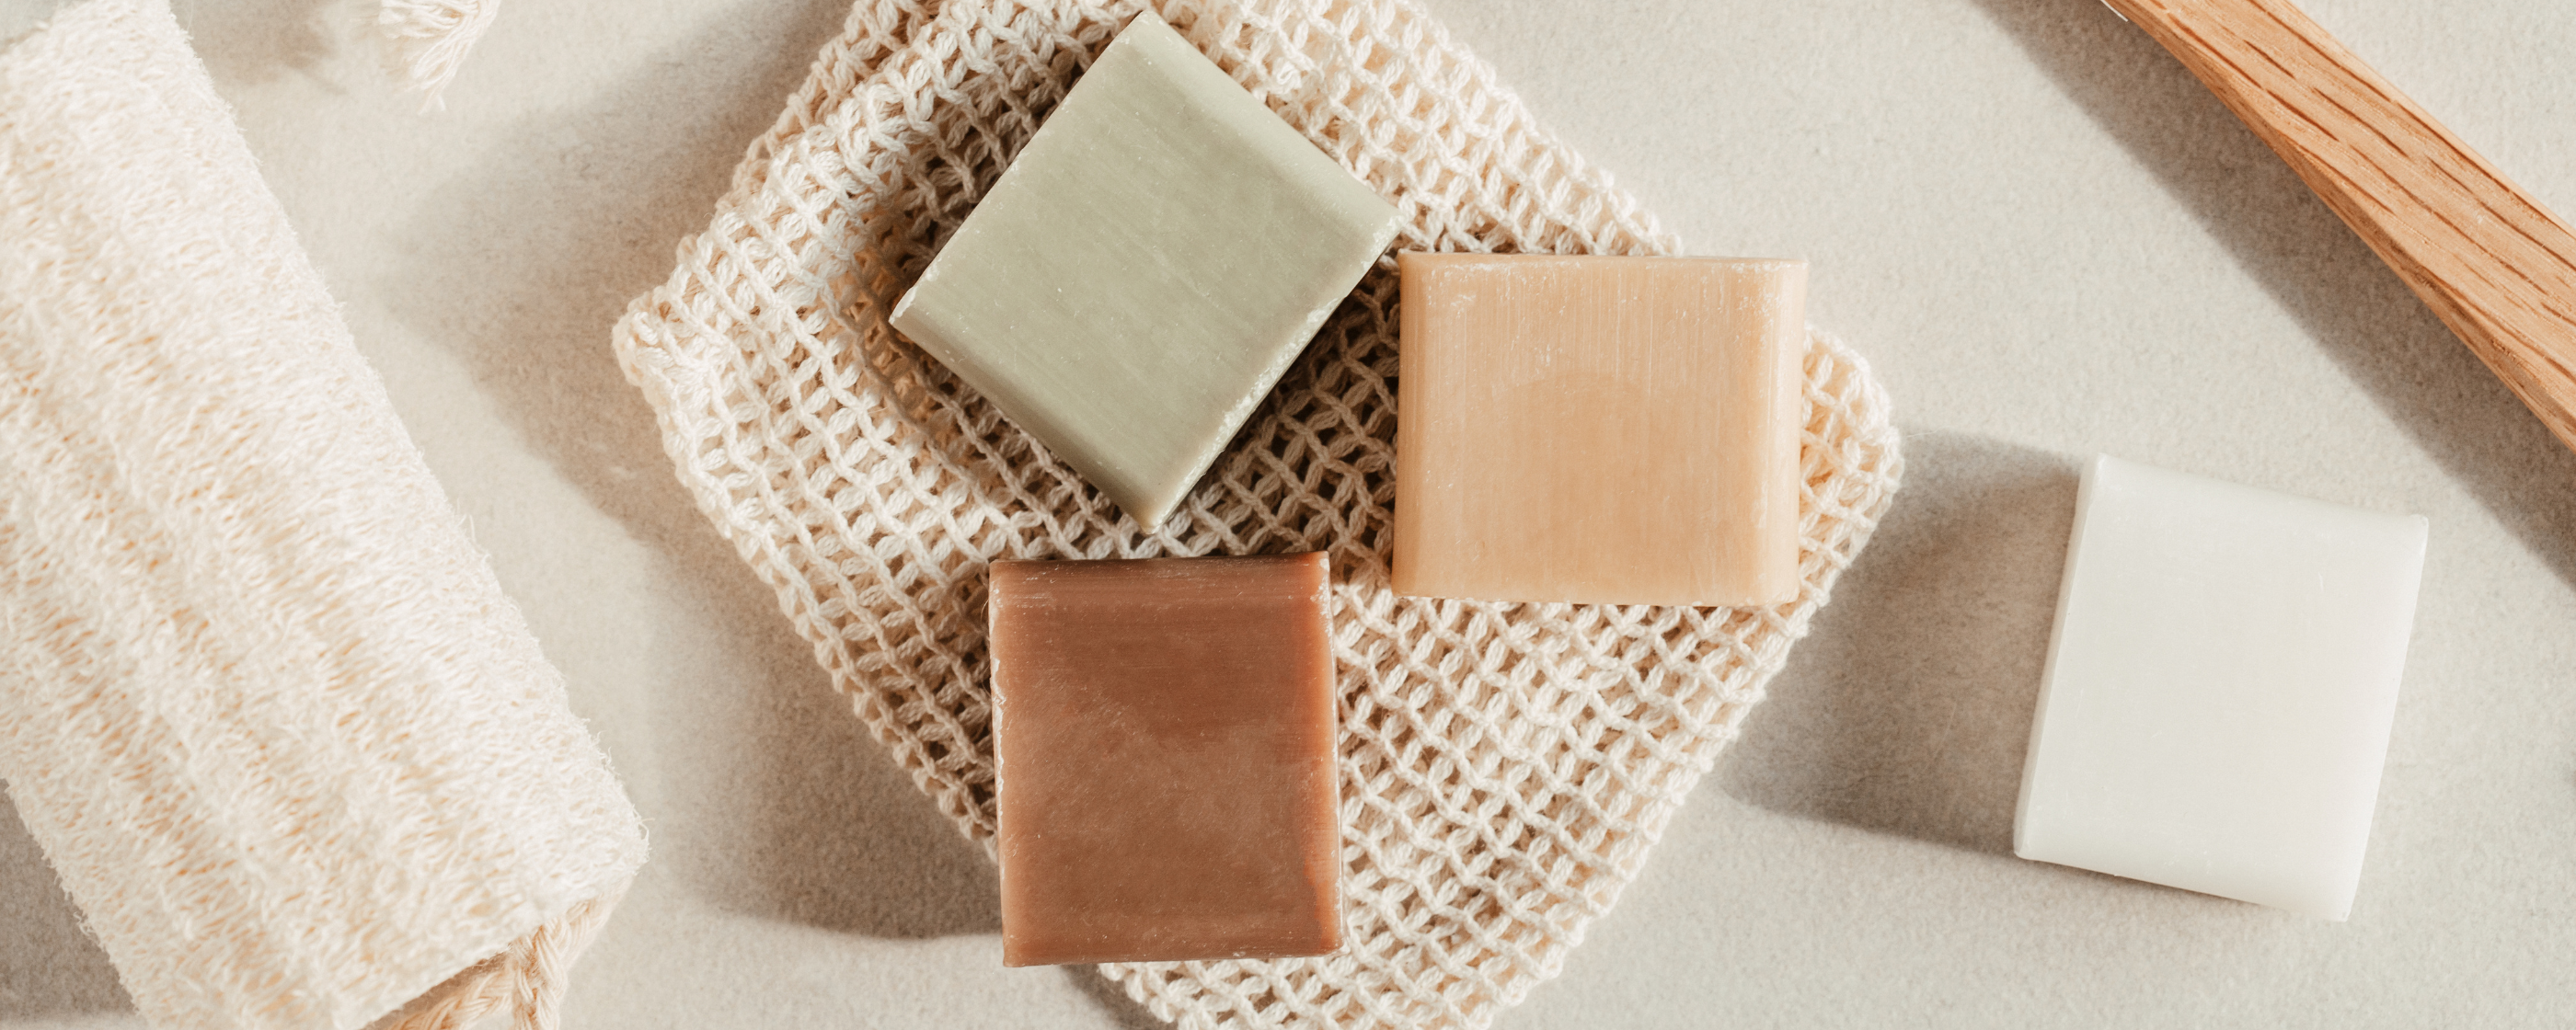 A variety of bar soaps, shampoos and conditioners for body and hair.